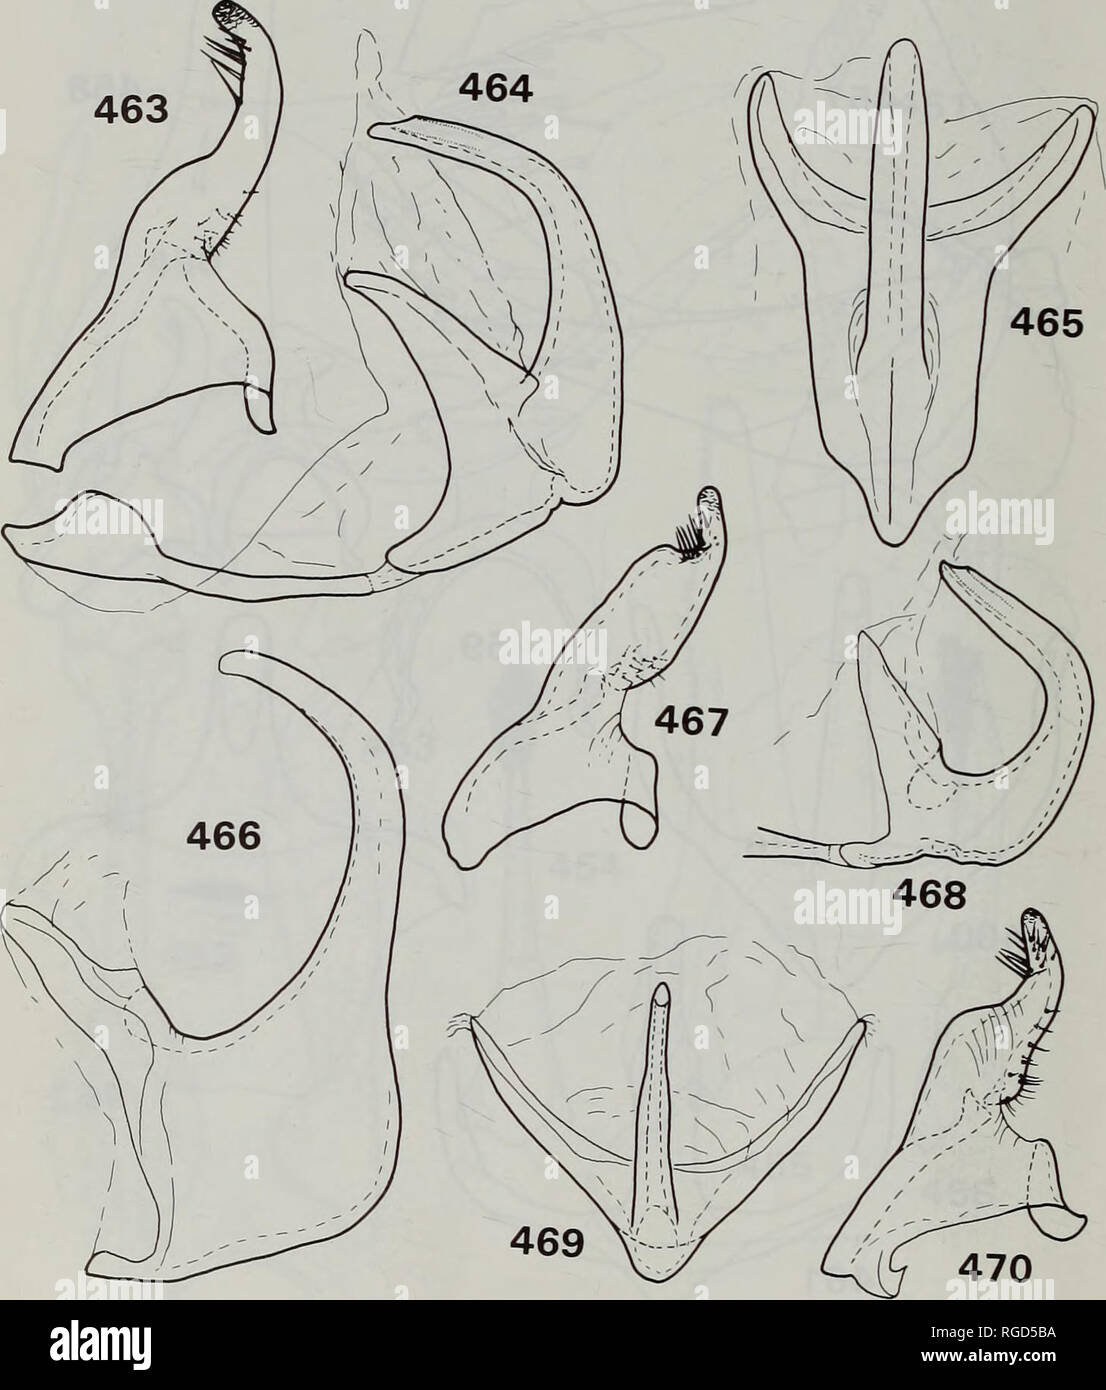 . Bulletin of the Natural History Museum Entomology. 94 Y. ZHANG AND M.D. WEBB. Figs 463-^170 Male genitalia of Rengatella species. 463^64, R. metallica. 463, left style, ventral view; 464, aedeagus and connective, left lateral view. 465^t67, R. robustipenis. 465, aedeagus, posterior view; 466, aedeagus, left lateral view; 467, left style, ventral view. 468^70, R. malayensis. 468, aedeagus, left lateral view; 469, aedeagus, posterior view; 470, left style, lateral view.. Please note that these images are extracted from scanned page images that may have been digitally enhanced for readability - Stock Photo